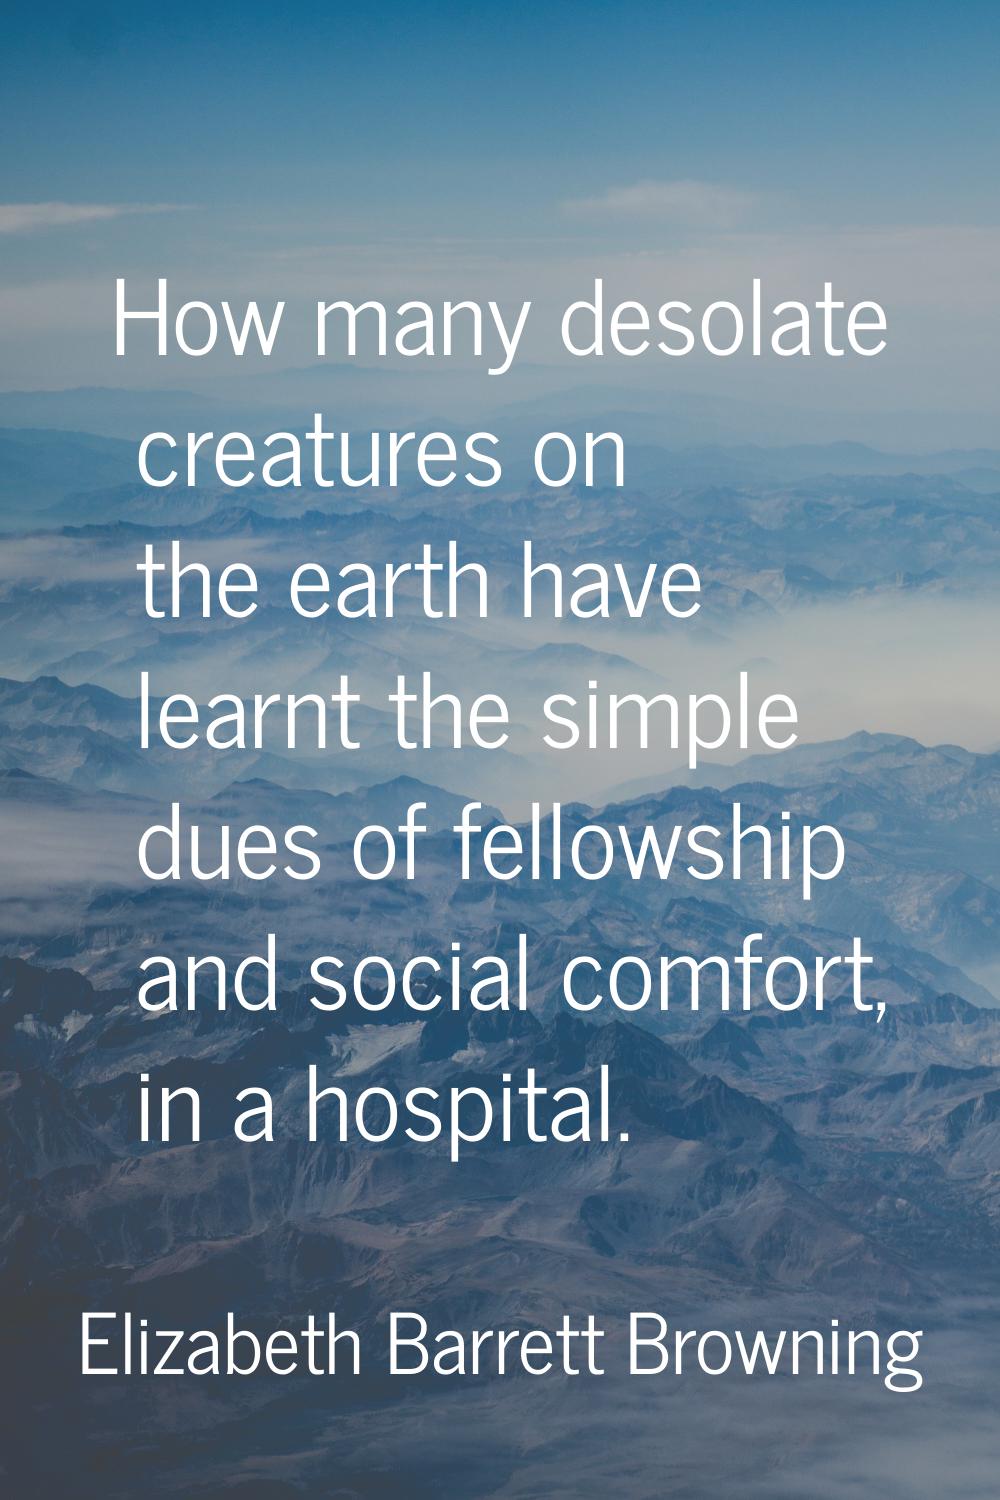 How many desolate creatures on the earth have learnt the simple dues of fellowship and social comfo